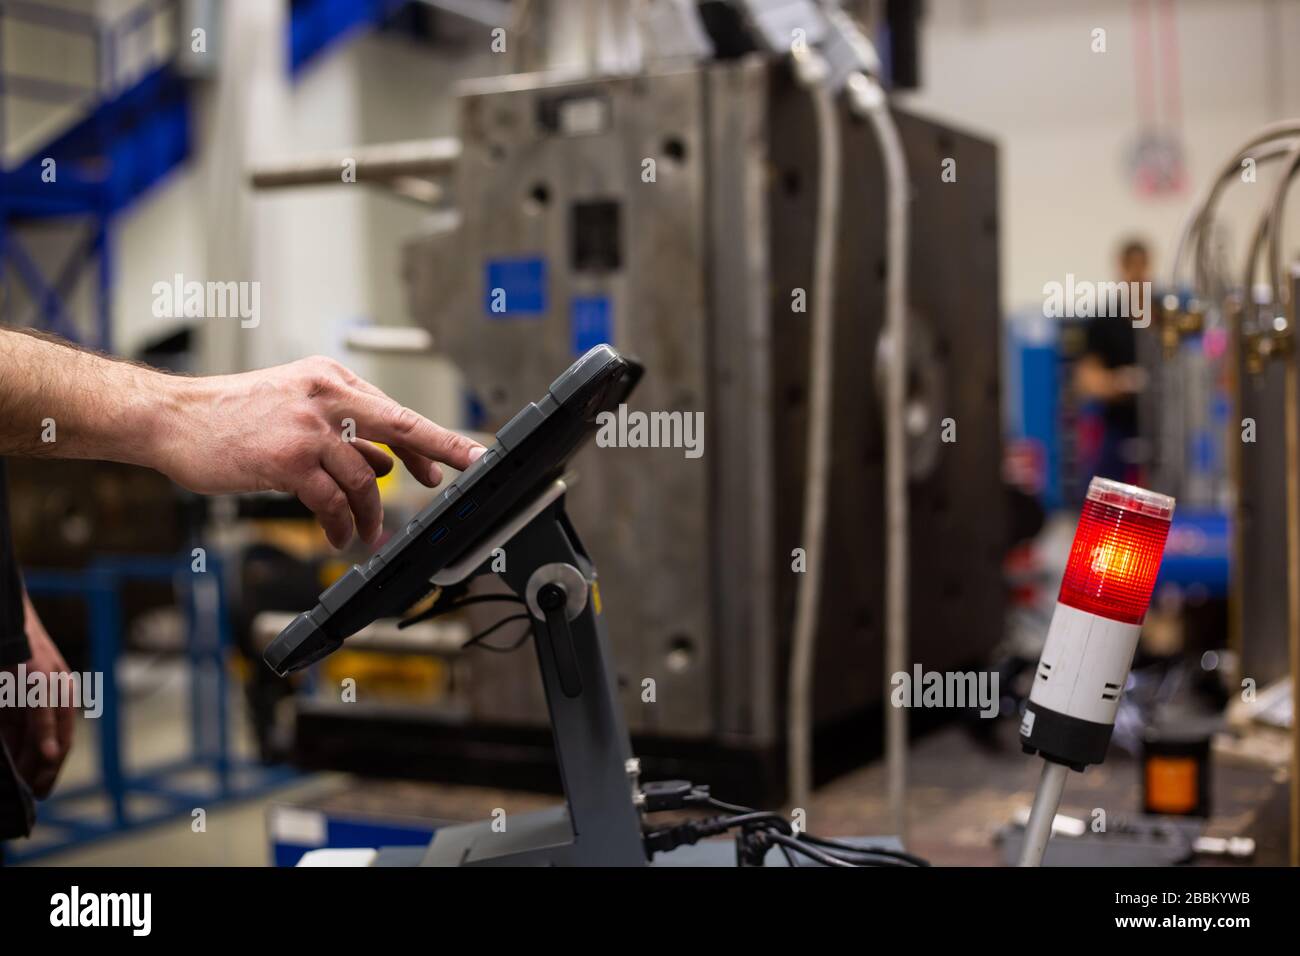 Repairman doing maintenance on the mold injection for plastic components, industrial concept Stock Photo